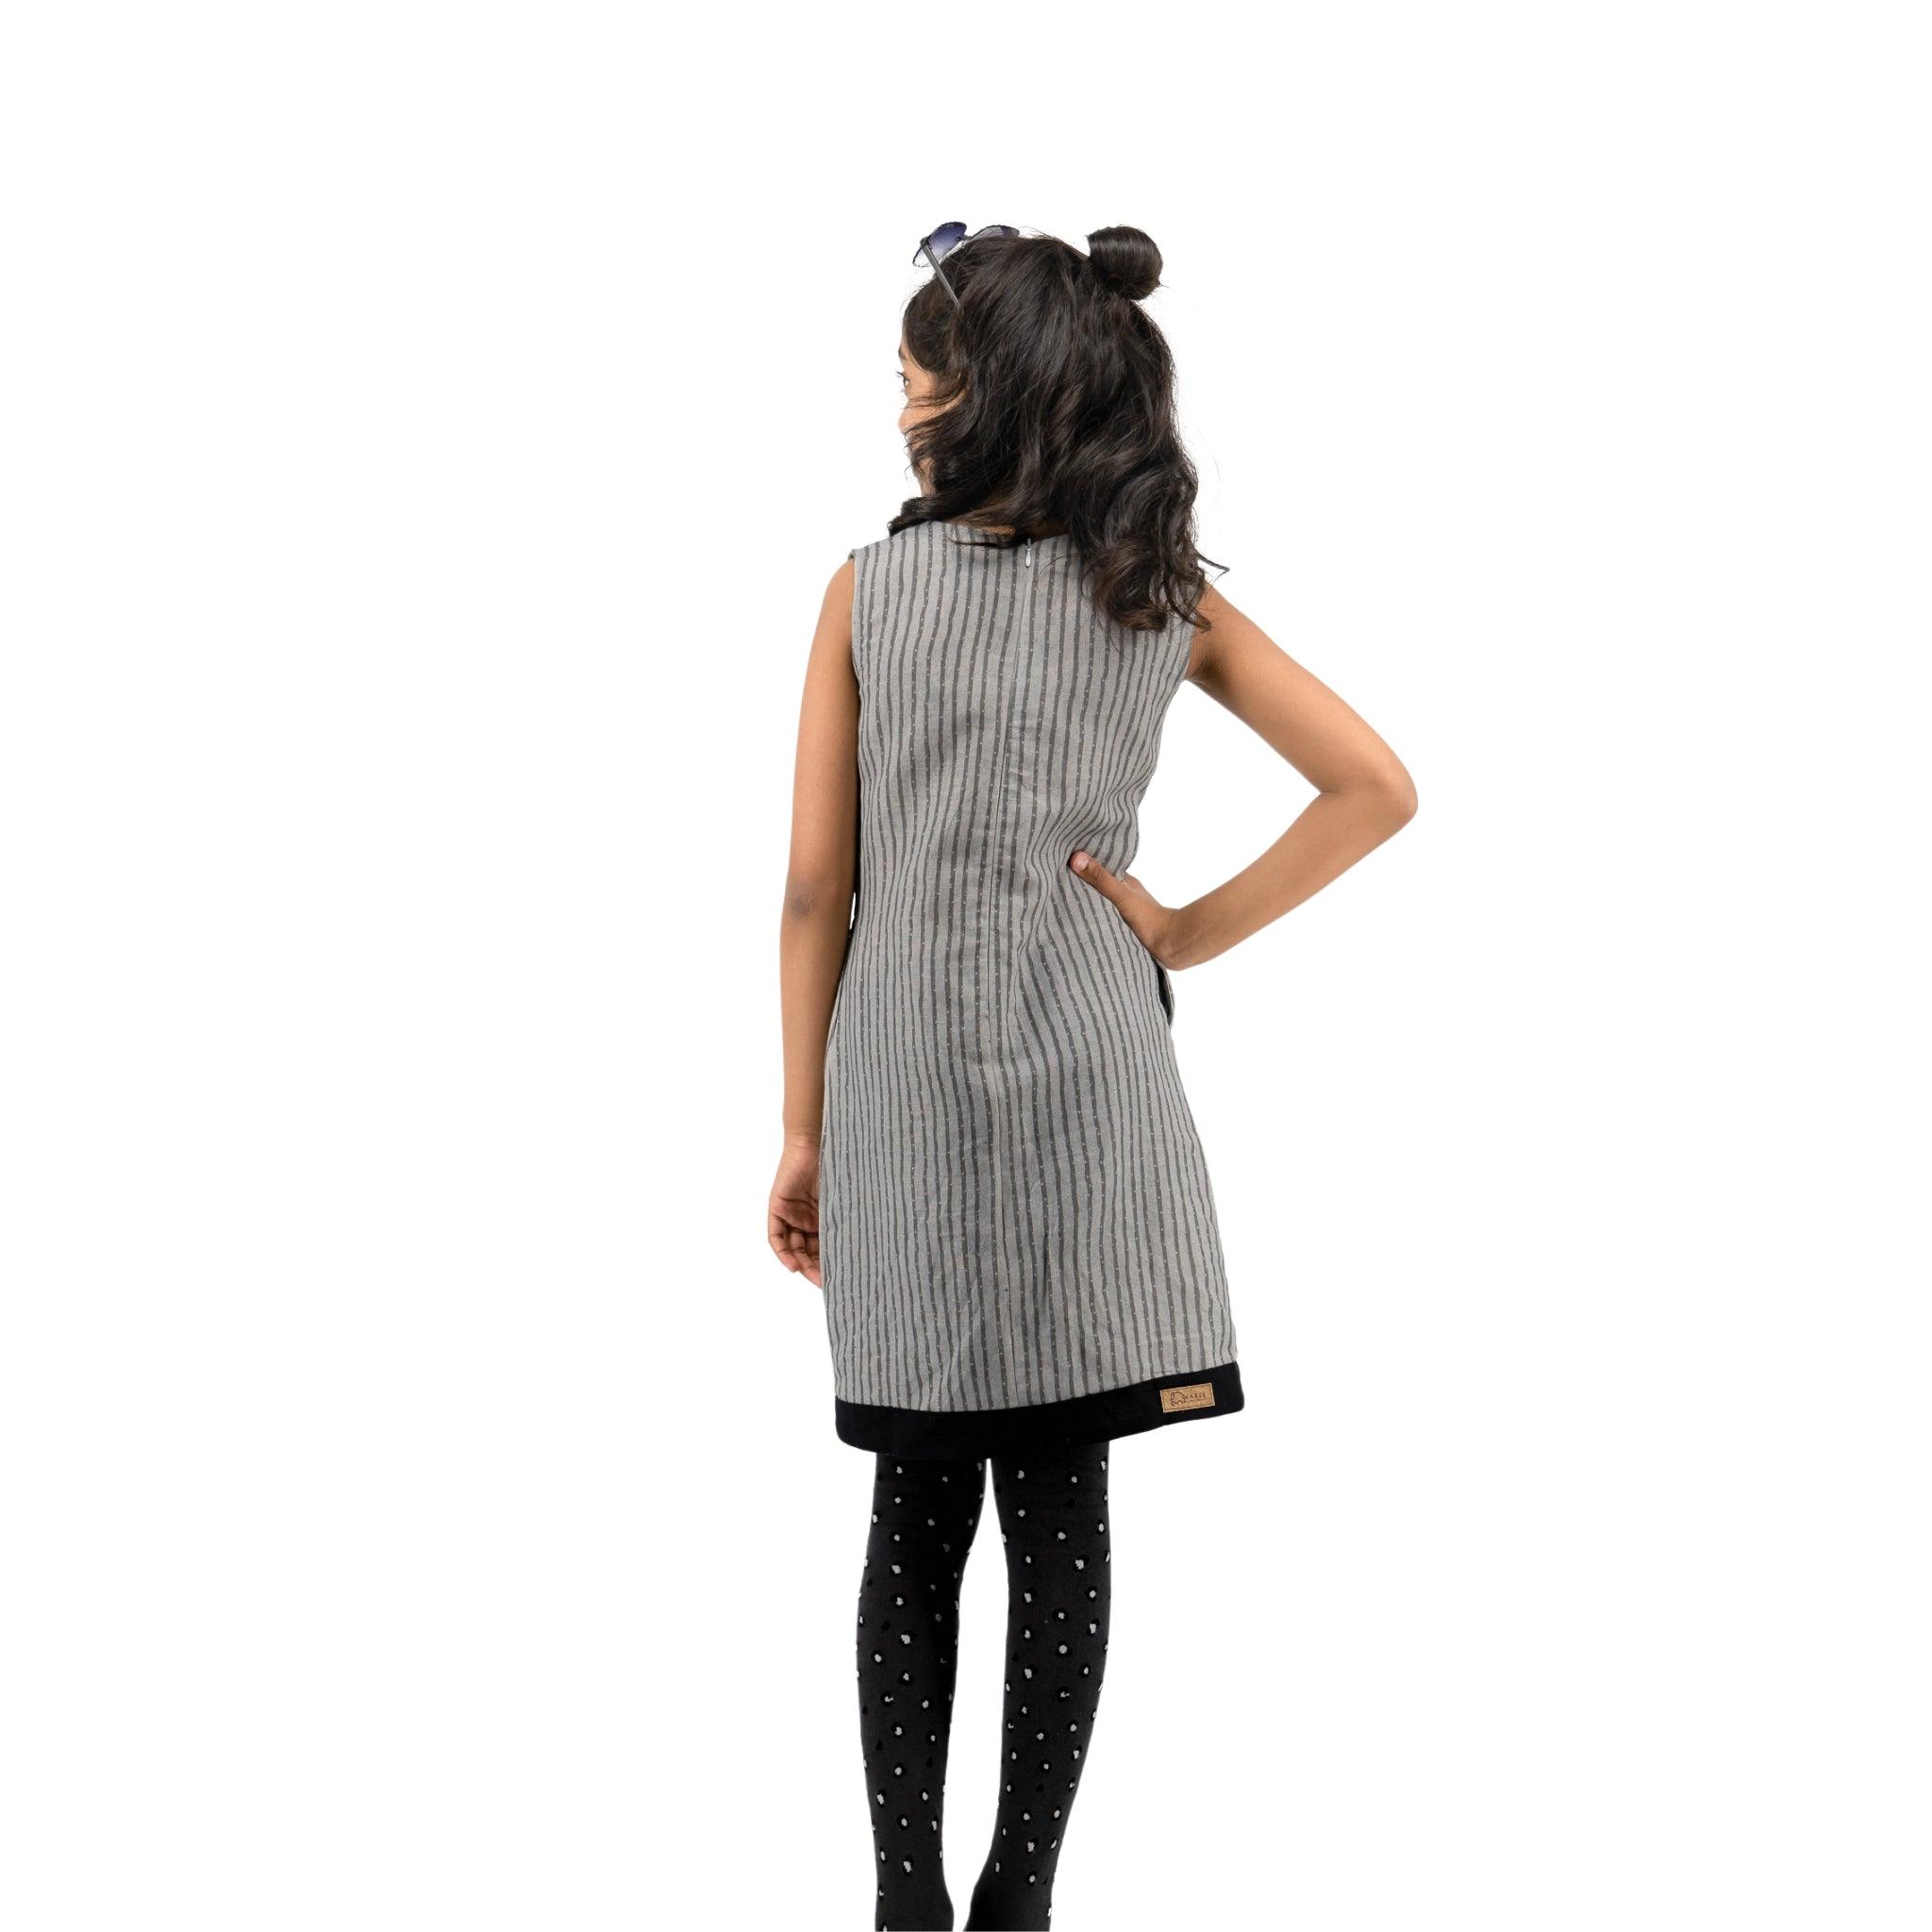 A woman with her back to the camera, wearing a striped sleeveless dress and polka-dot leggings, stands against a white background, showcasing Karee's Linen Cotton Round Neck Frock for Kids in Steel Grey.